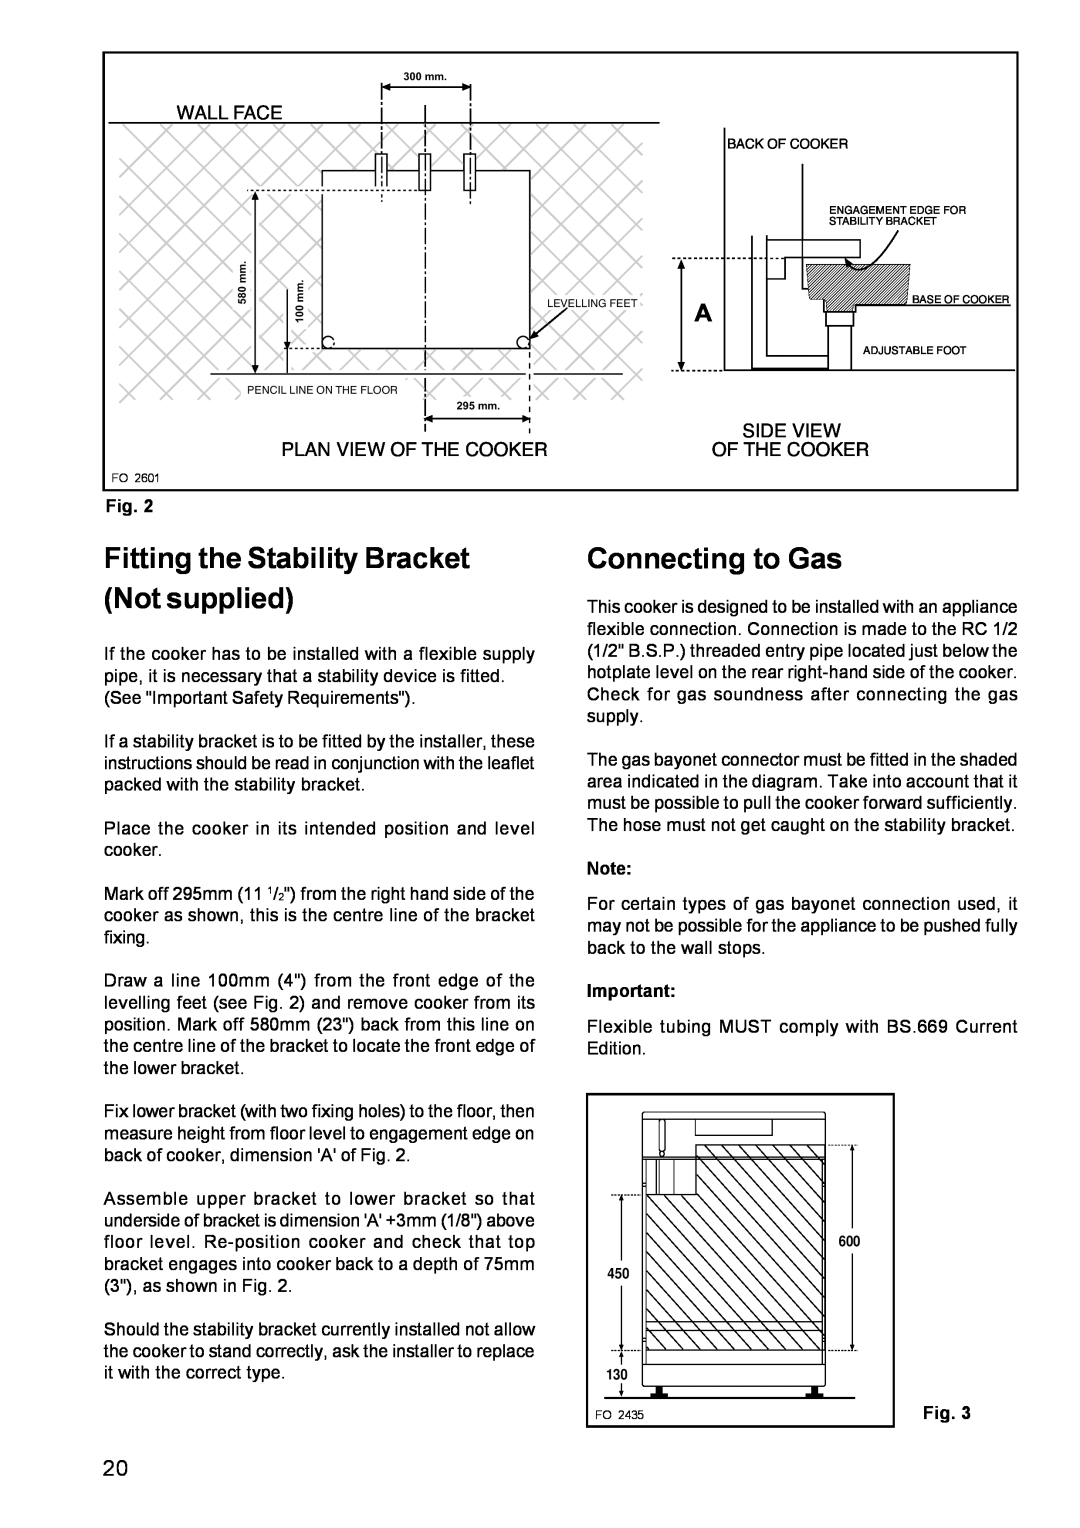 Parkinson Cowan CSIM 509 Fitting the Stability Bracket Not supplied, Connecting to Gas, Wall Face, Plan View Of The Cooker 